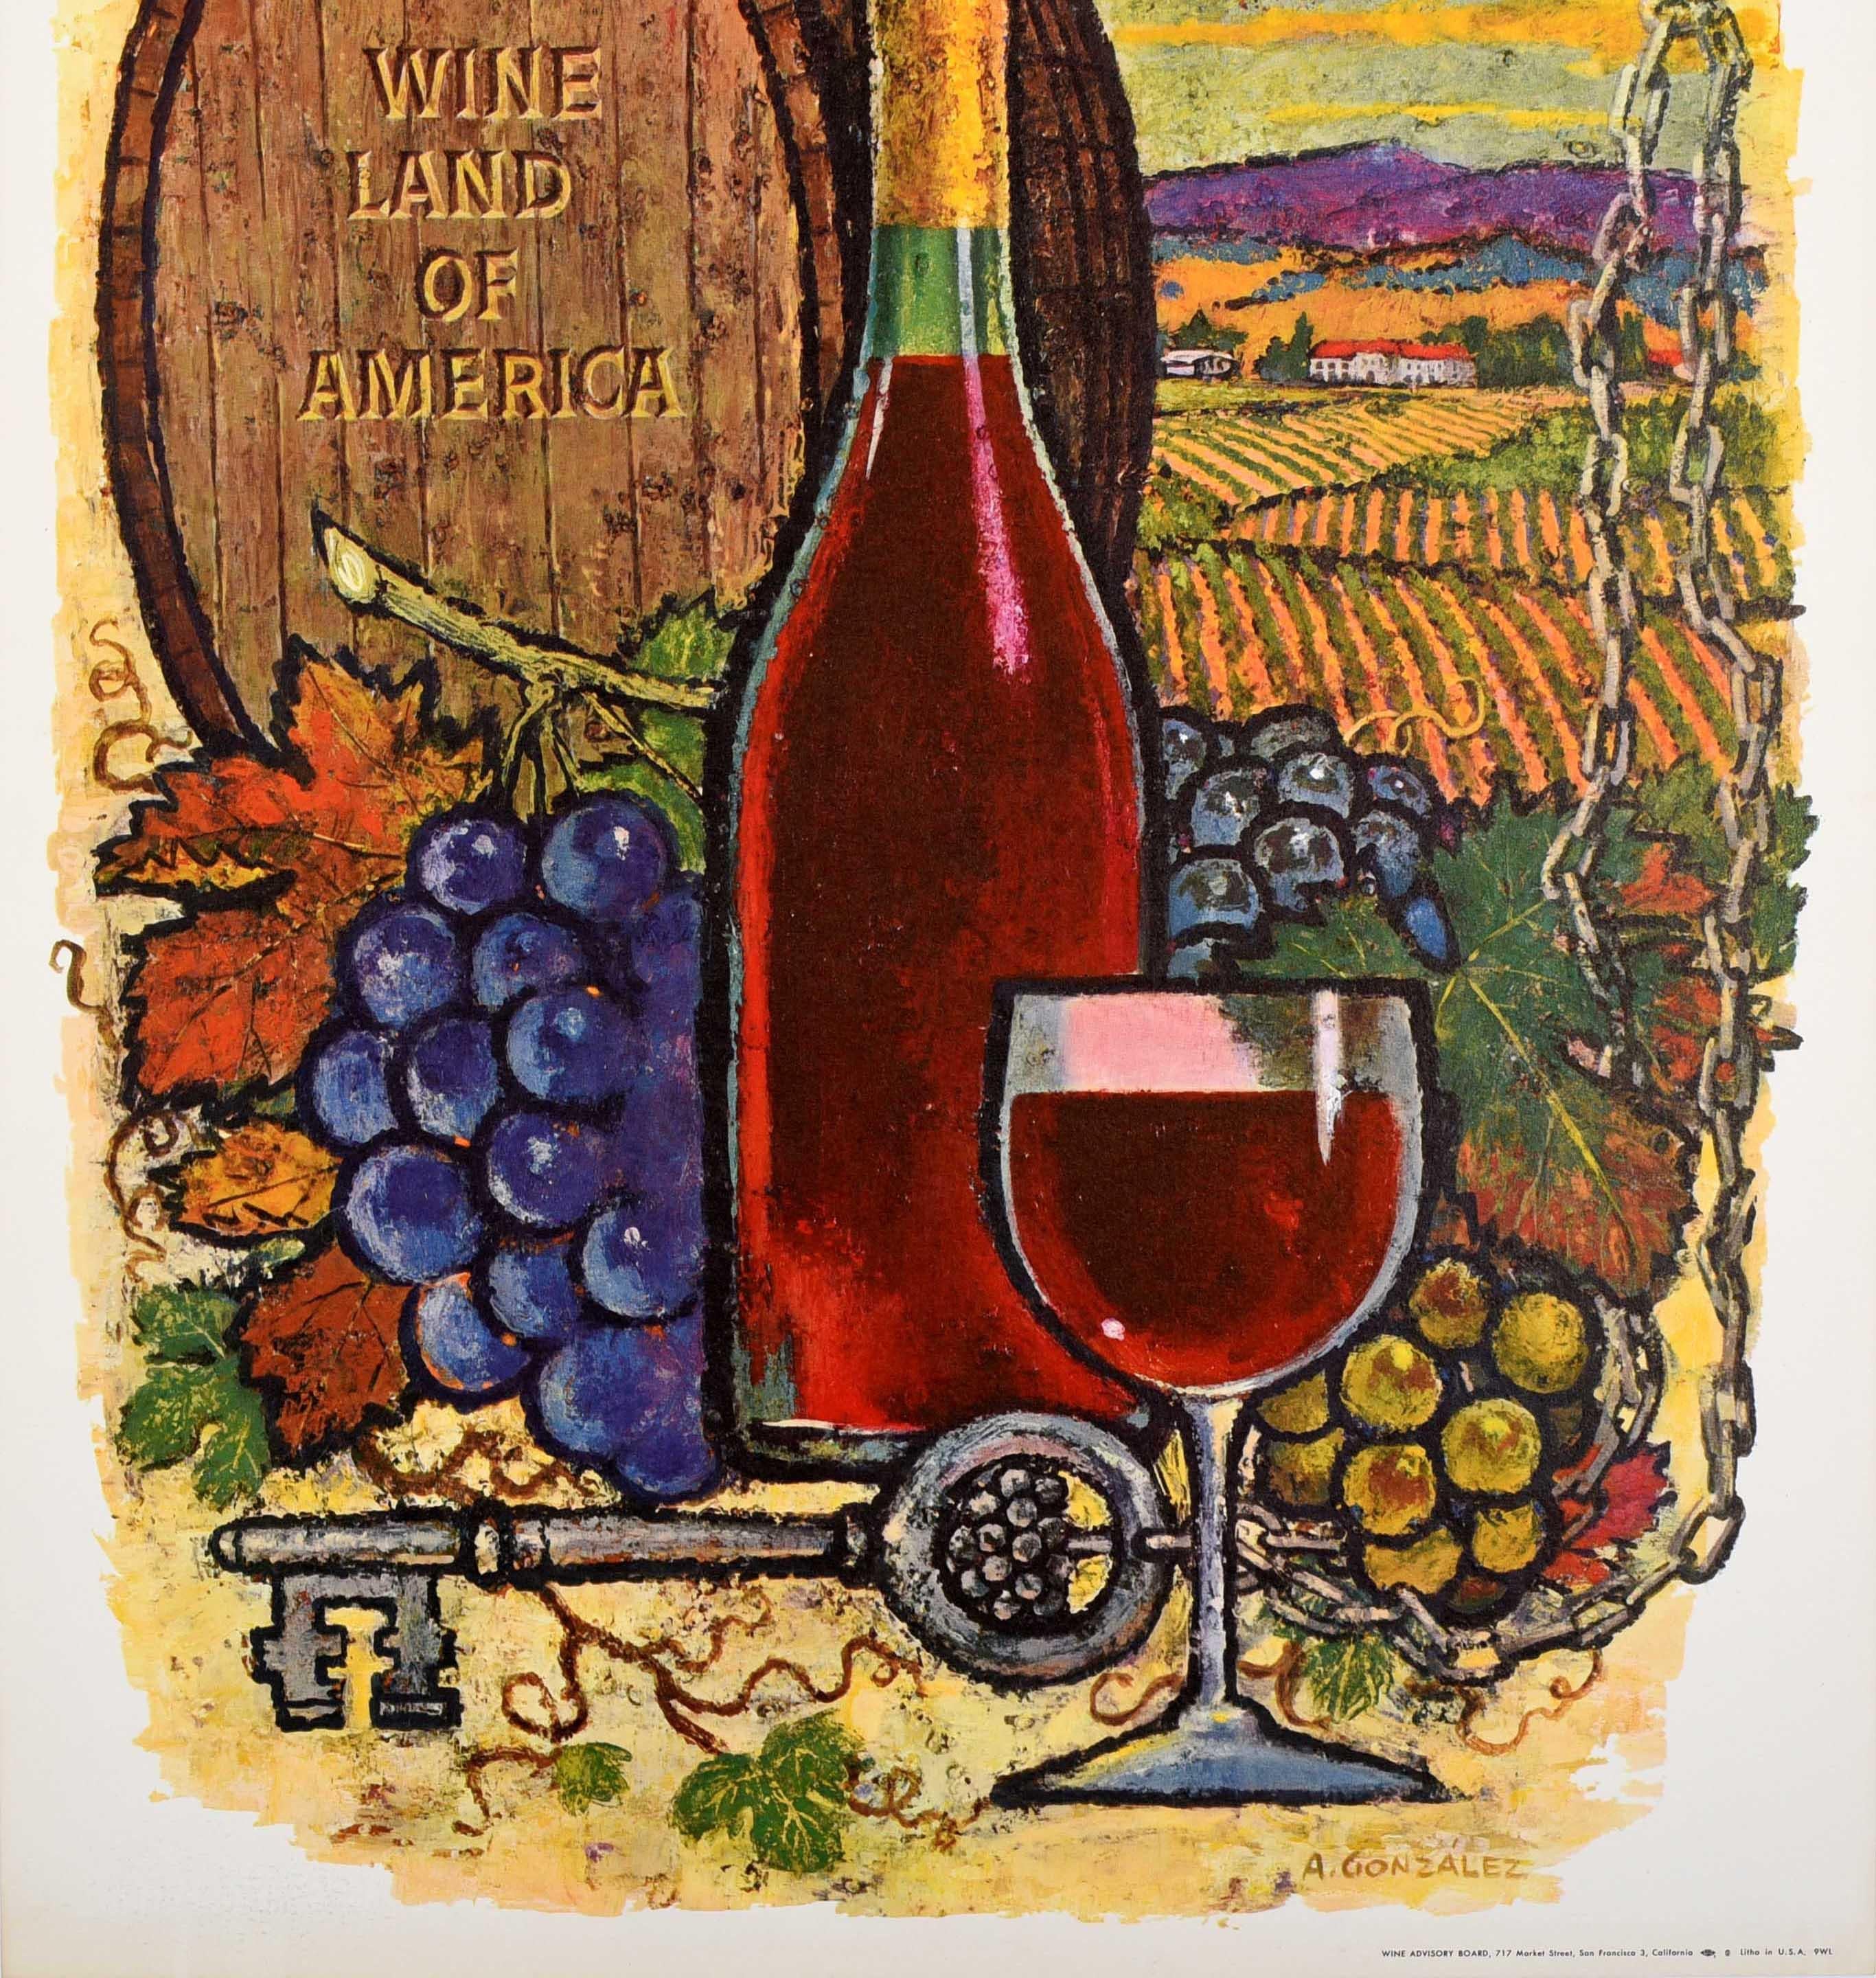 Original vintage drink advertising travel poster - California Wine Land of America - featuring colourful artwork by Amado Gonzalez (1913-2007) depicting a bottle of red wine with a glass in front of a wooden barrel with a key on a chain, grapes and